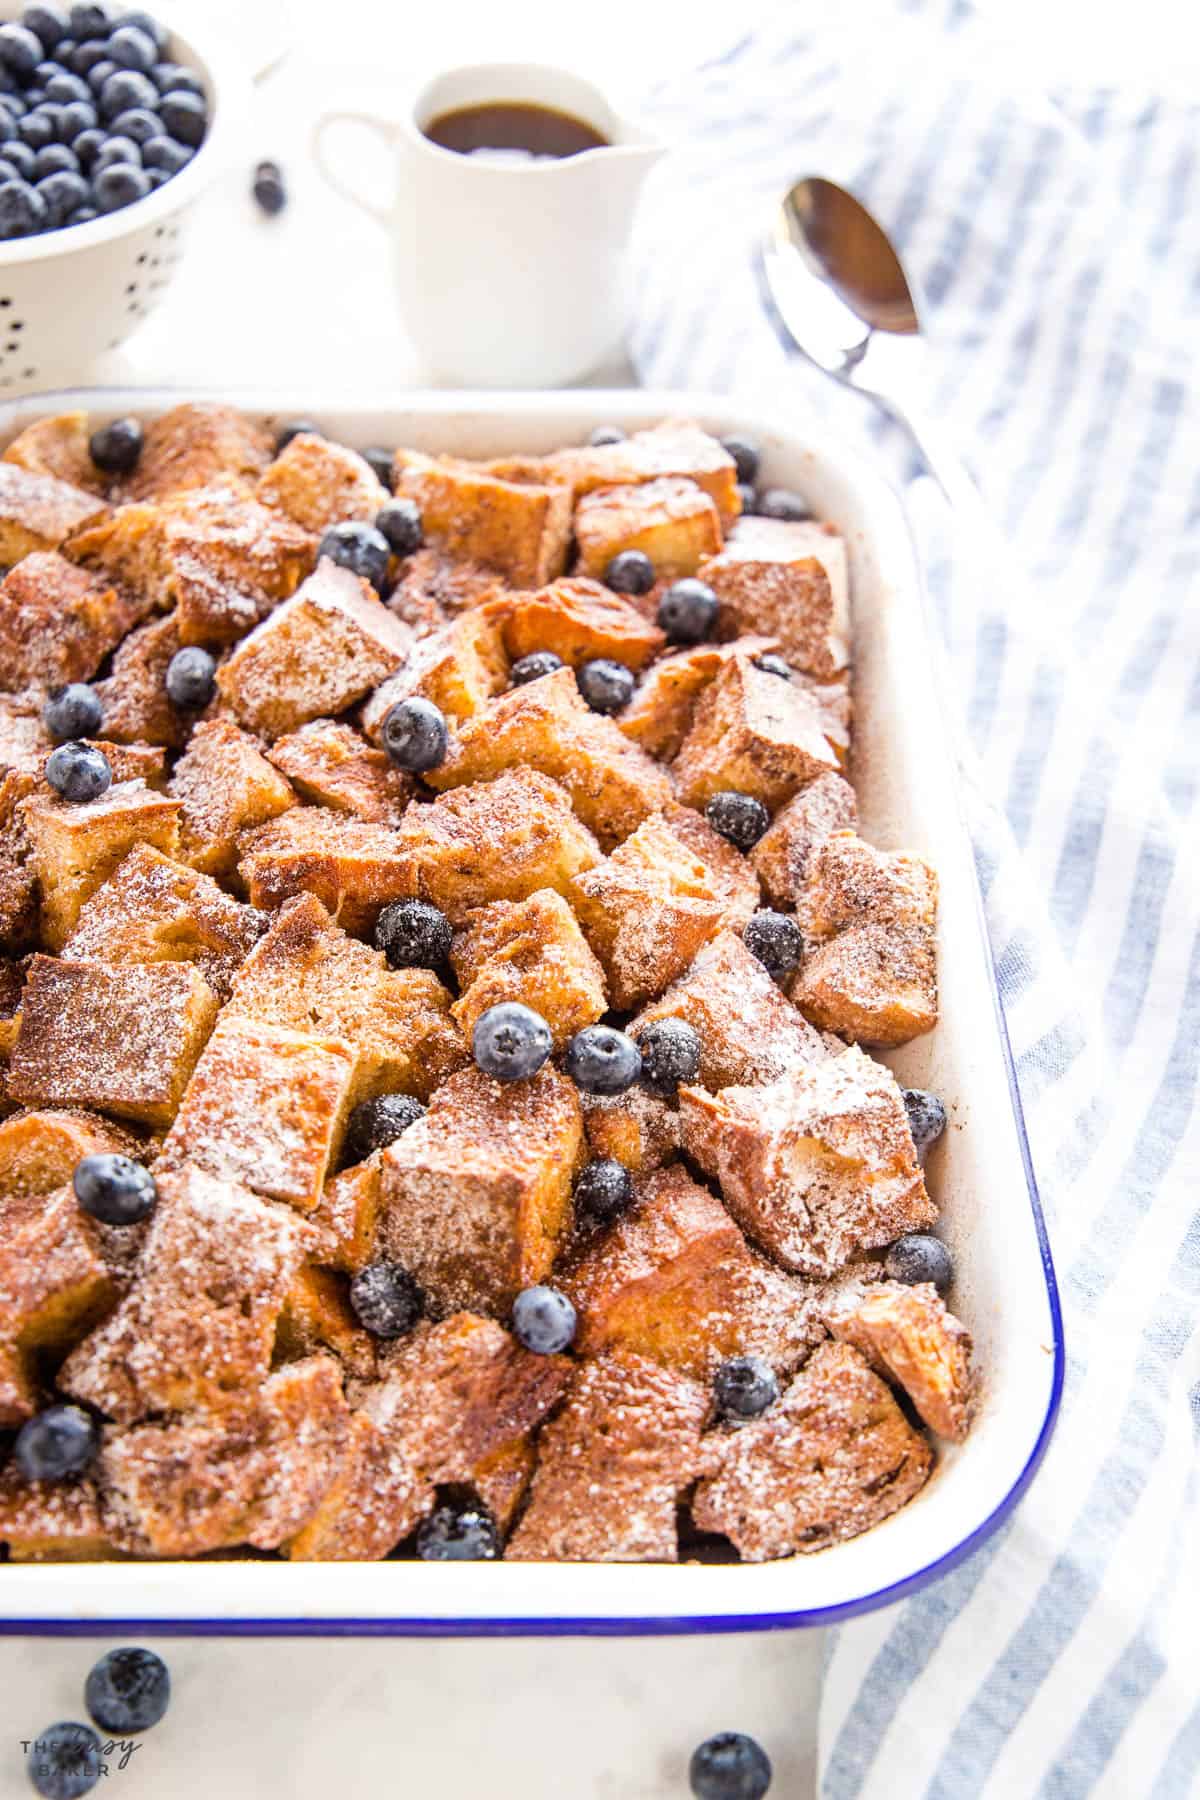 cinnamon sugar breakfast bake with blueberries and powdered sugar in a white baking pan